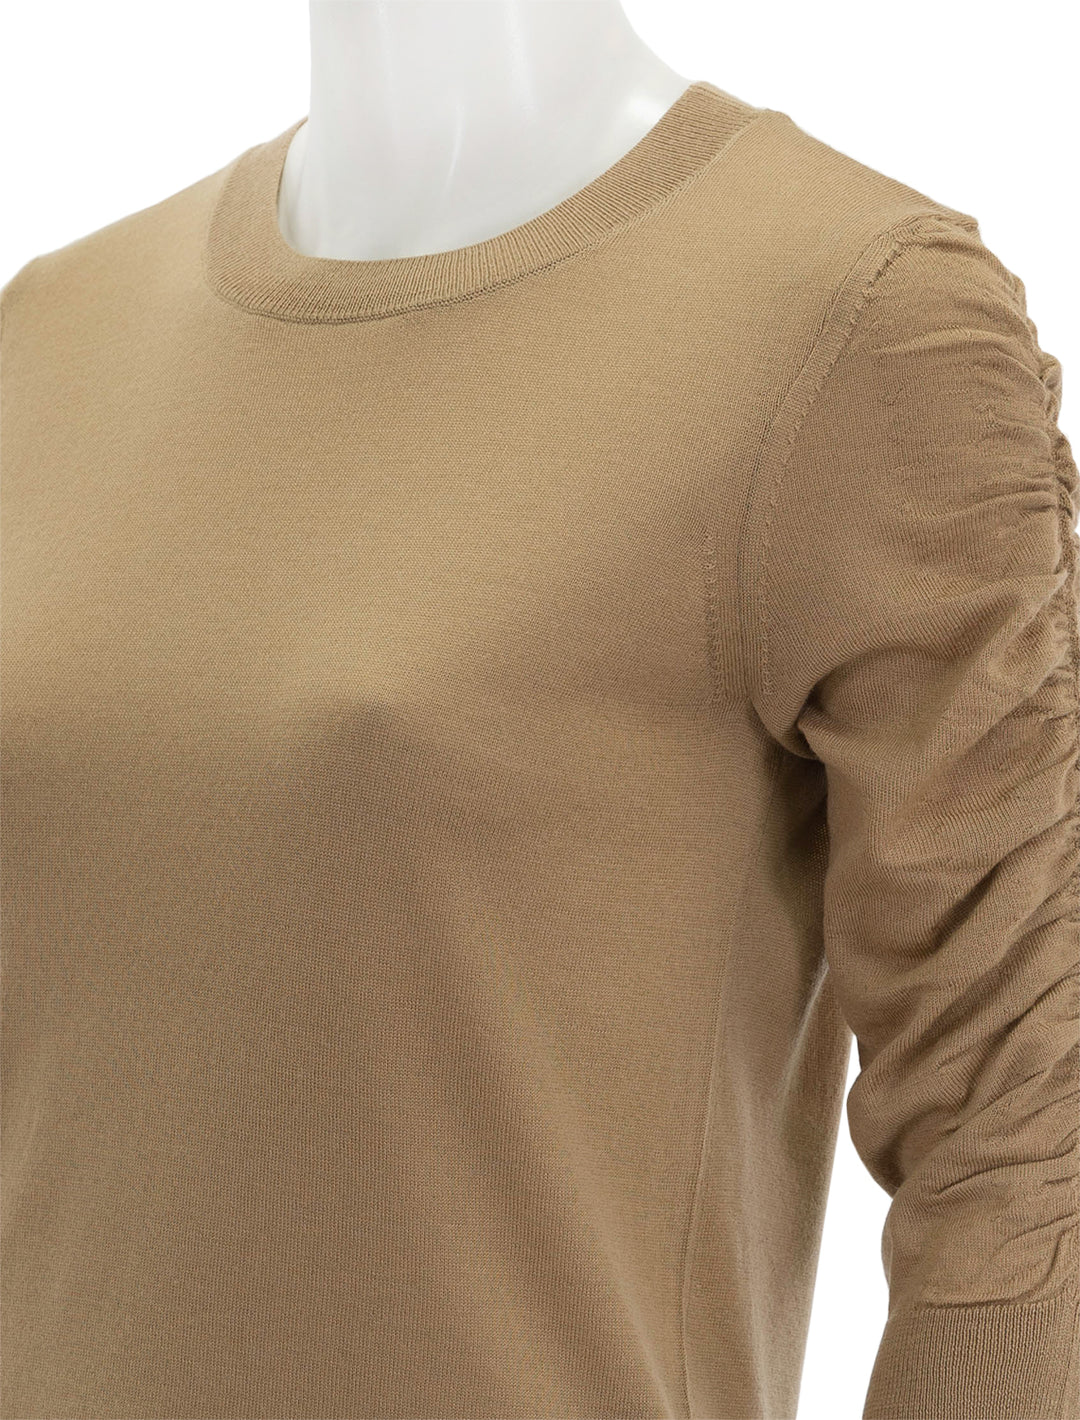 Close-up view of Veronica Beard's kase pullover in camel.